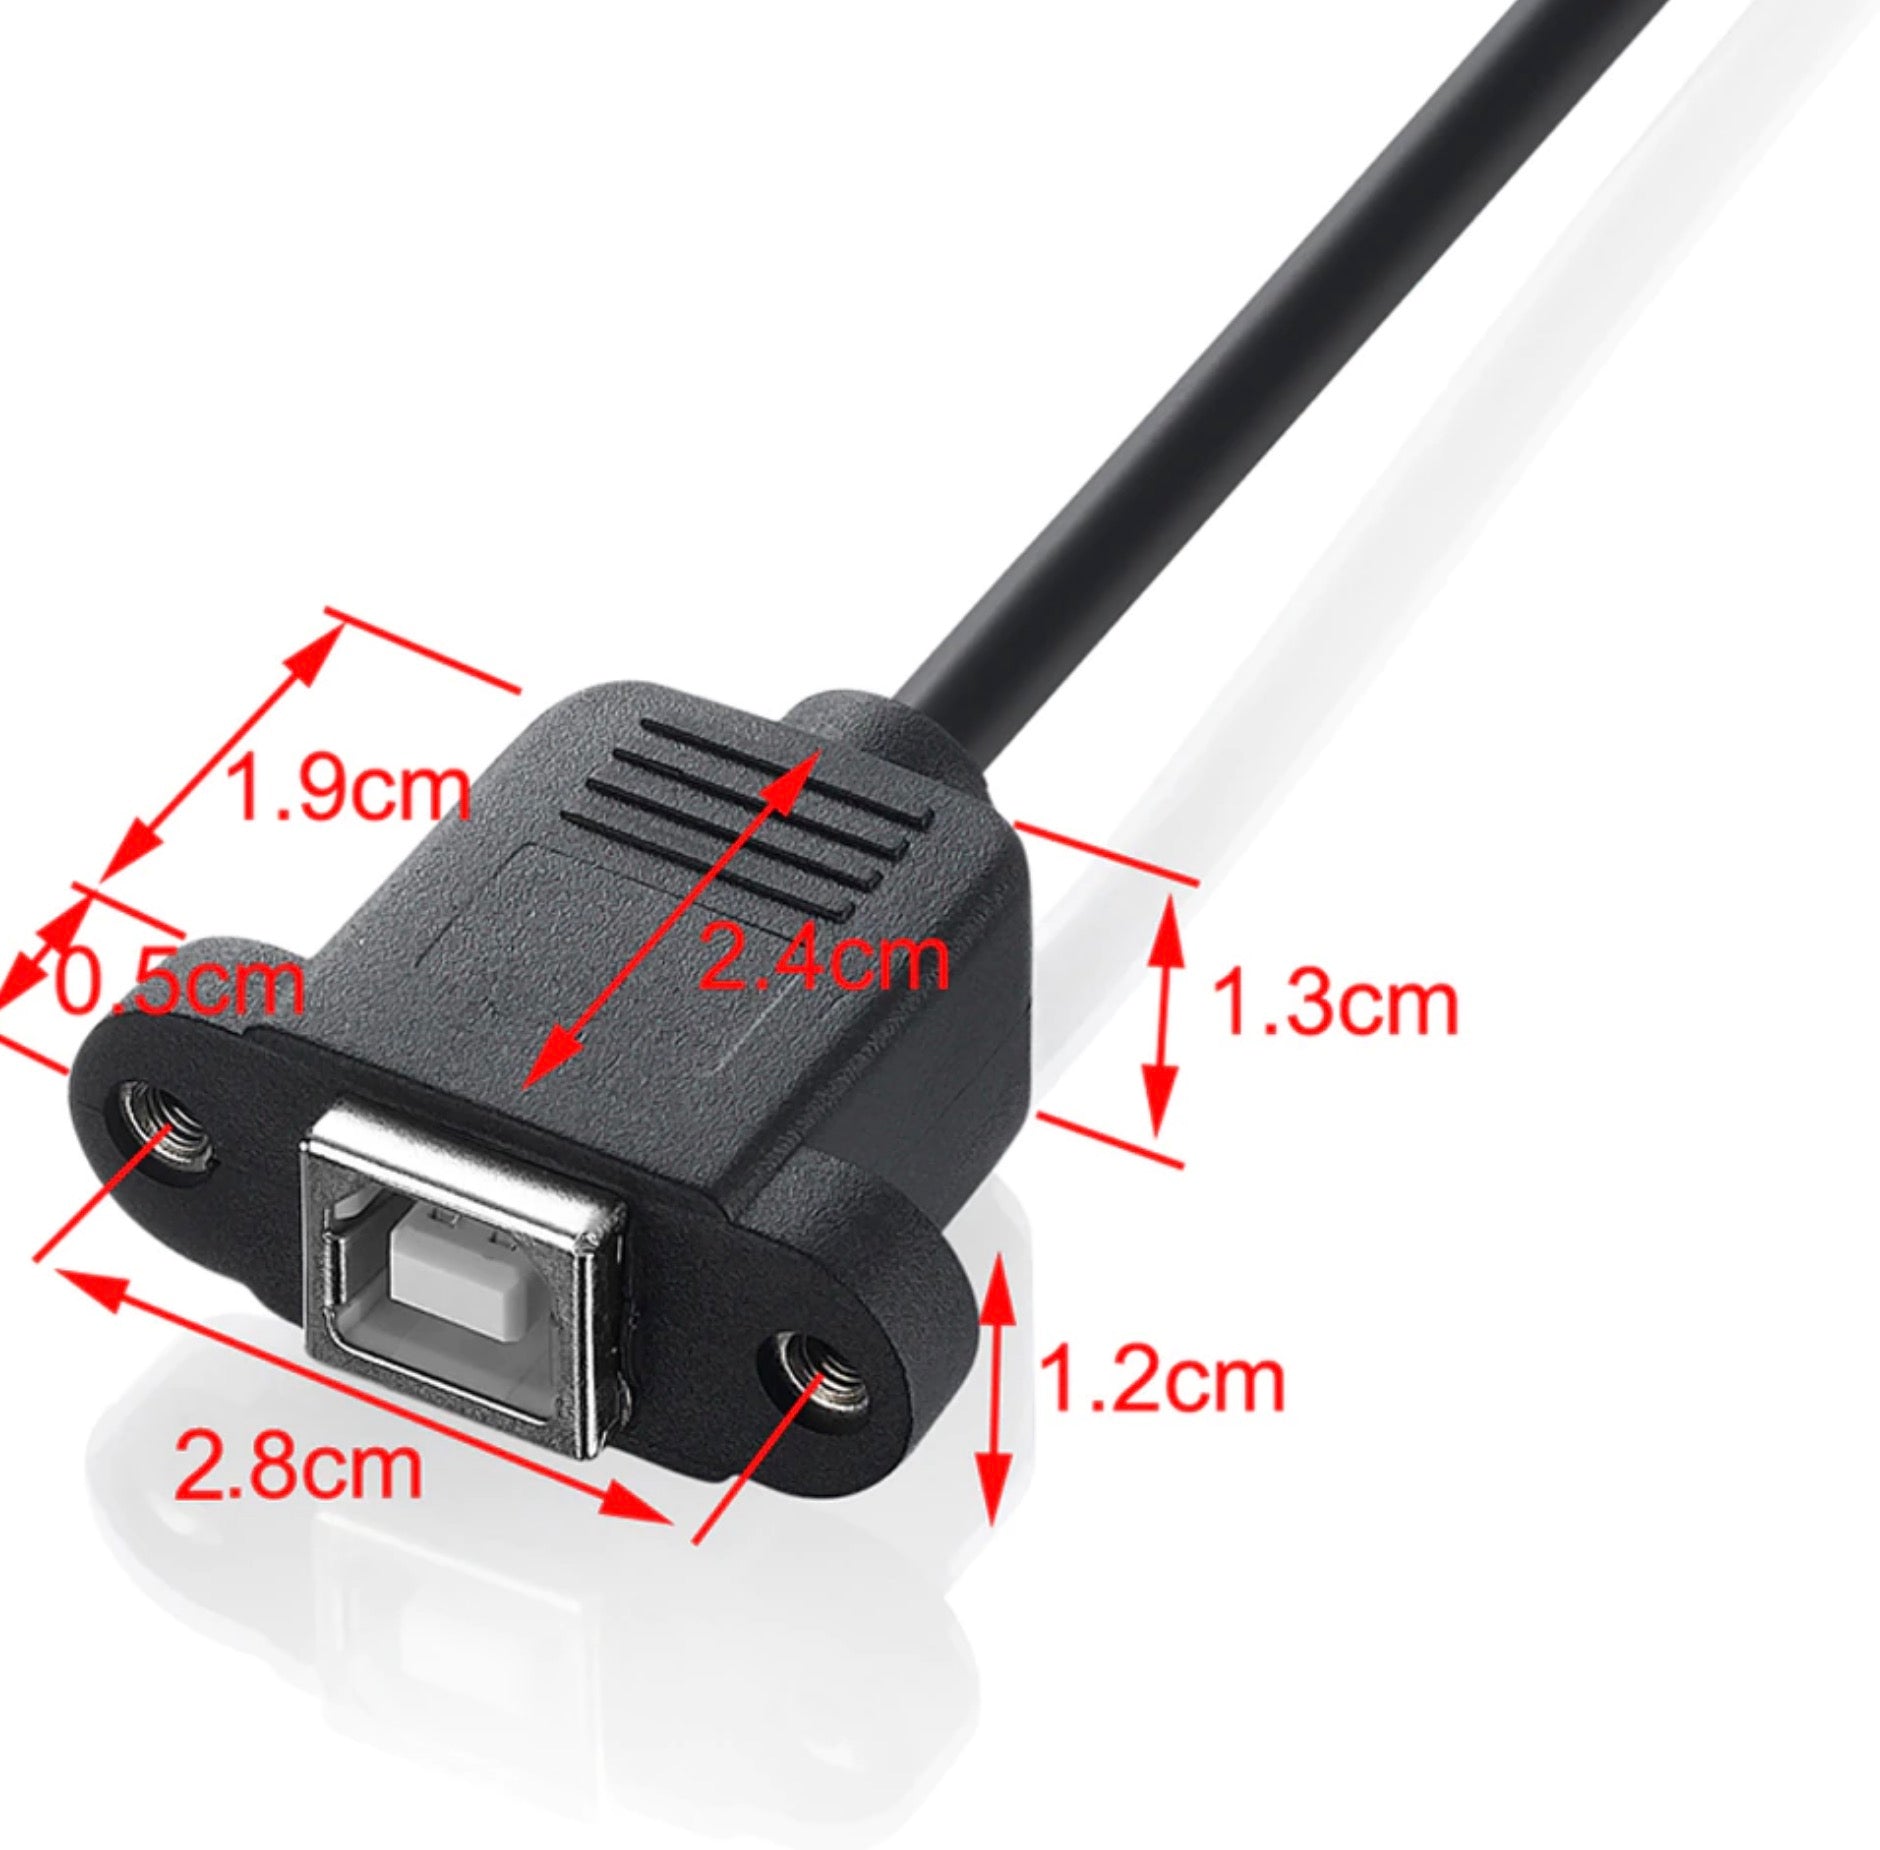 USB 2.0 Type B Male to Female Printer Extension Cable